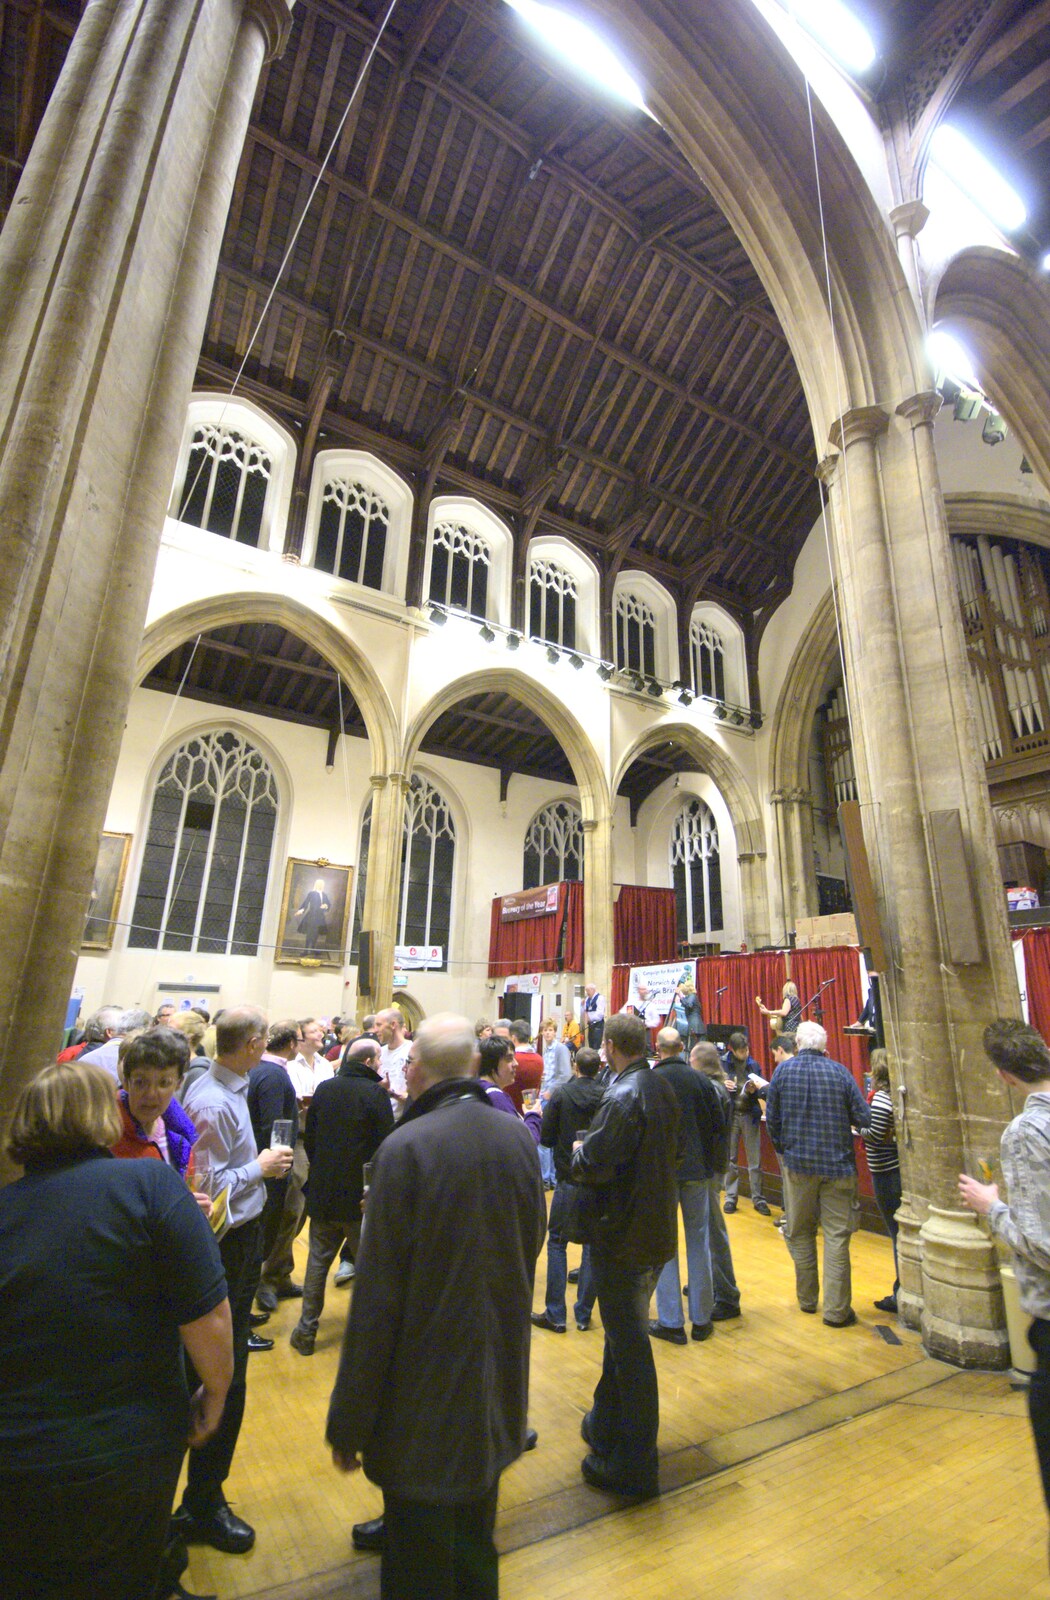 St. Andrew's Hall from The Norwich Beer Festival, St. Andrew's Hall, Norwich, Norfolk - 27th October 2010